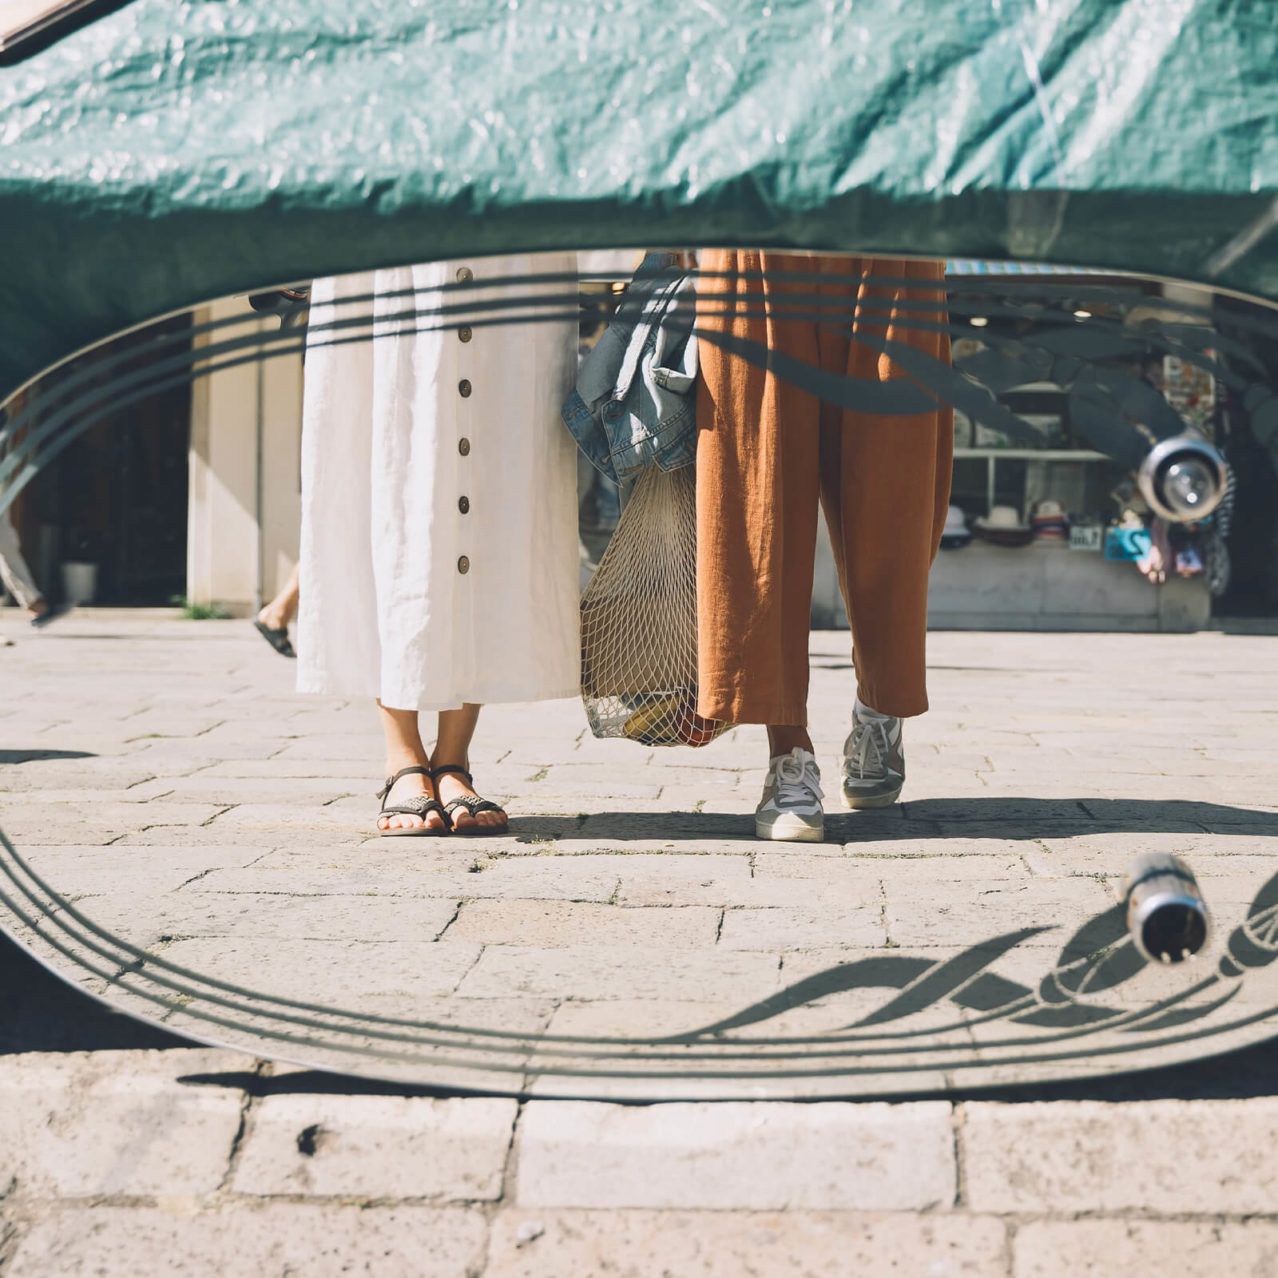 Mirror at a vintage market reflecting the legs of two people. One is carrying a shopping bag.